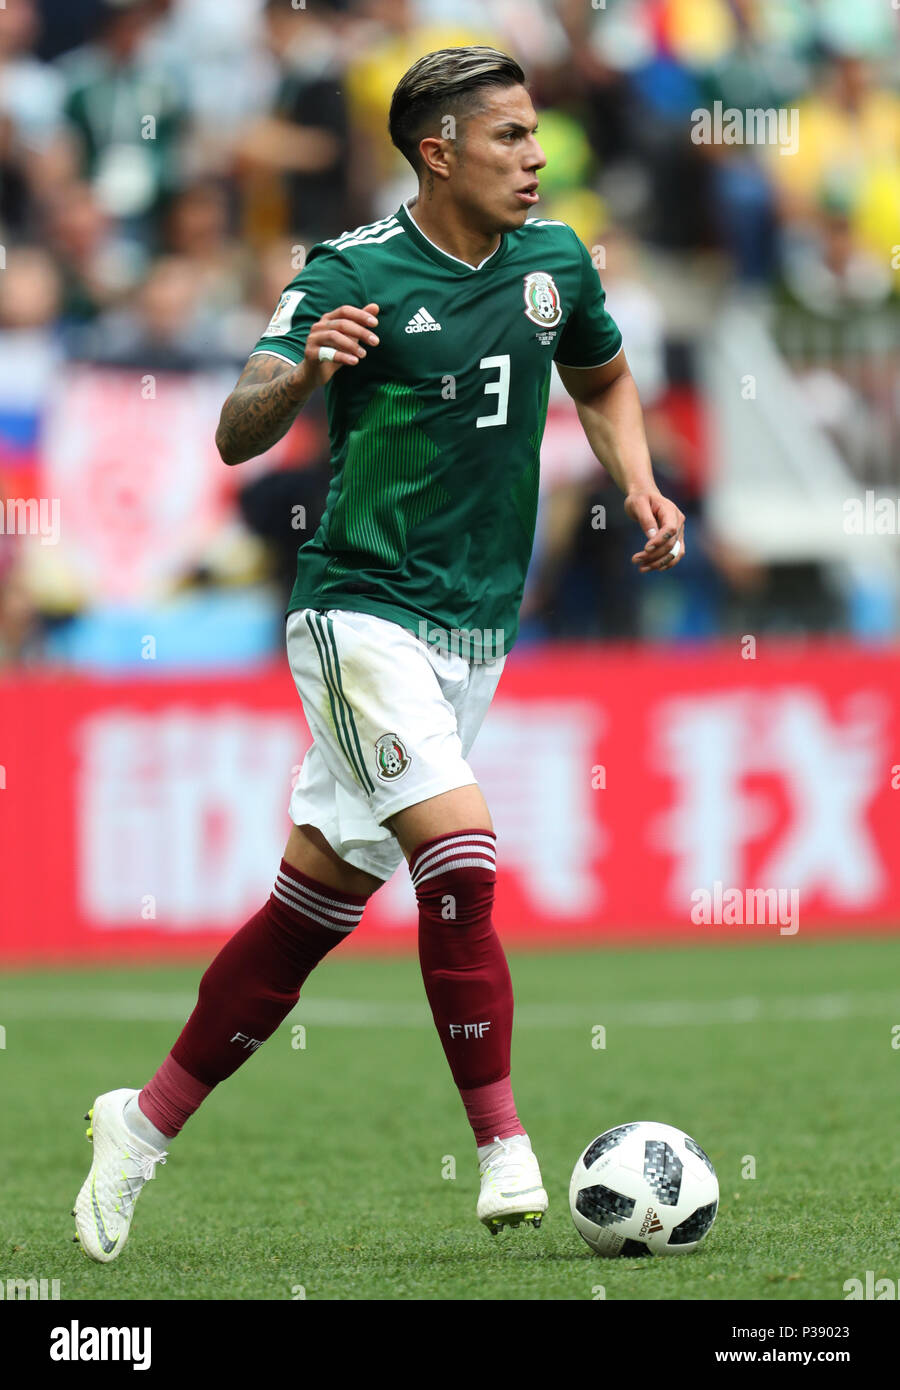 Carlos Salcedo MEXICO GERMANY V MEXICO, 2018 FIFA WORLD CUP RUSSIA 17 June 2018 GBC8259 Germany v Mexico 2018 FIFA World Cup Russia STRICTLY EDITORIAL USE ONLY